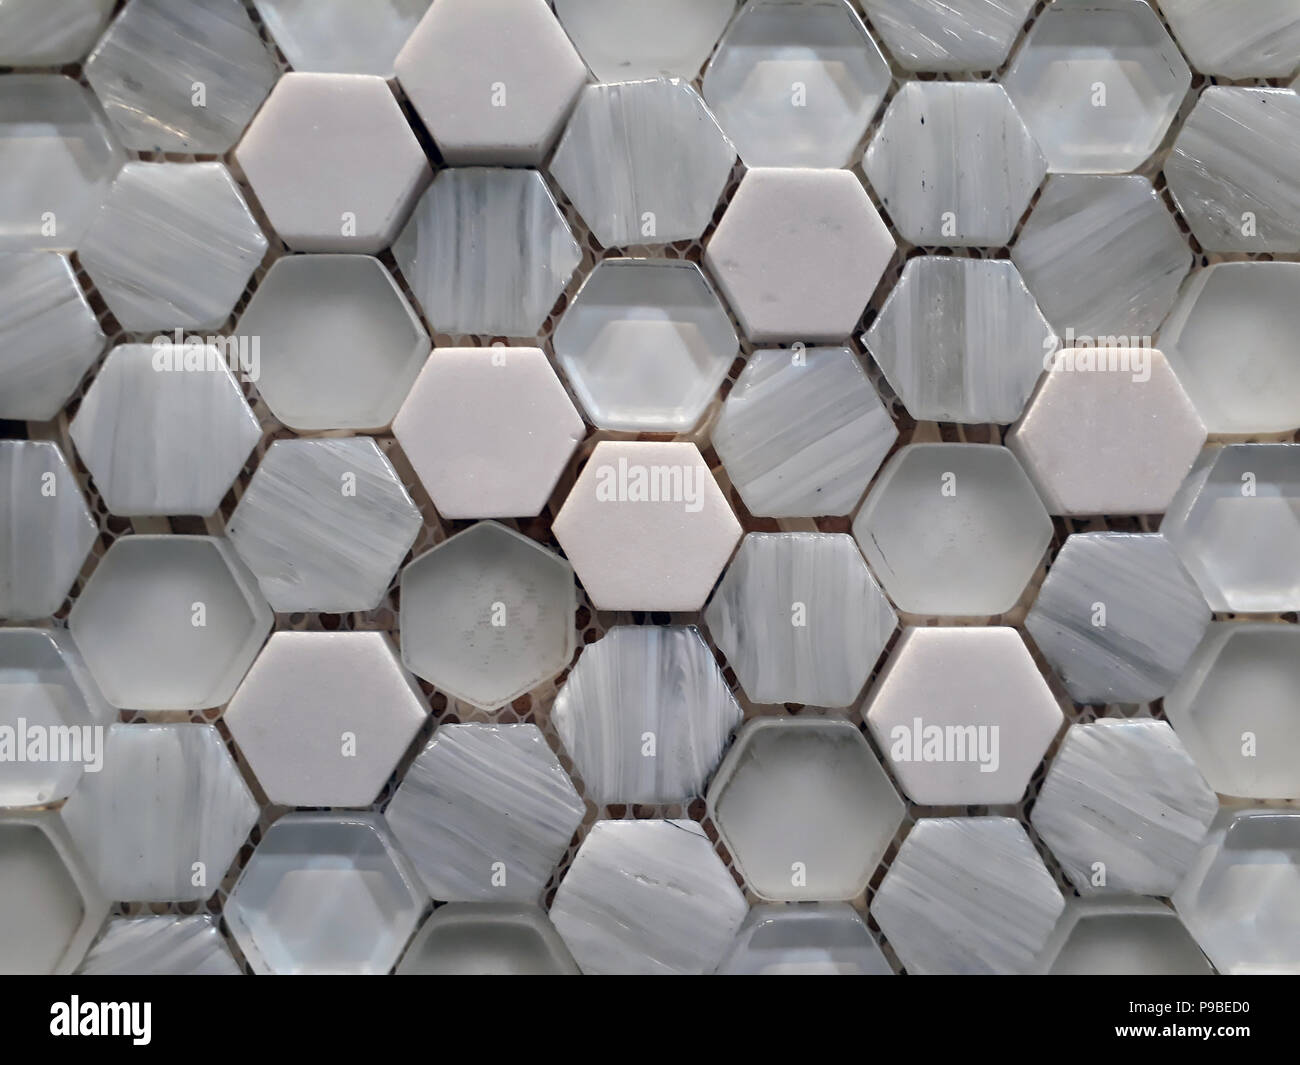 Hexagonal cellular decorative plastic wall panel, may be used as background or texture Stock Photo